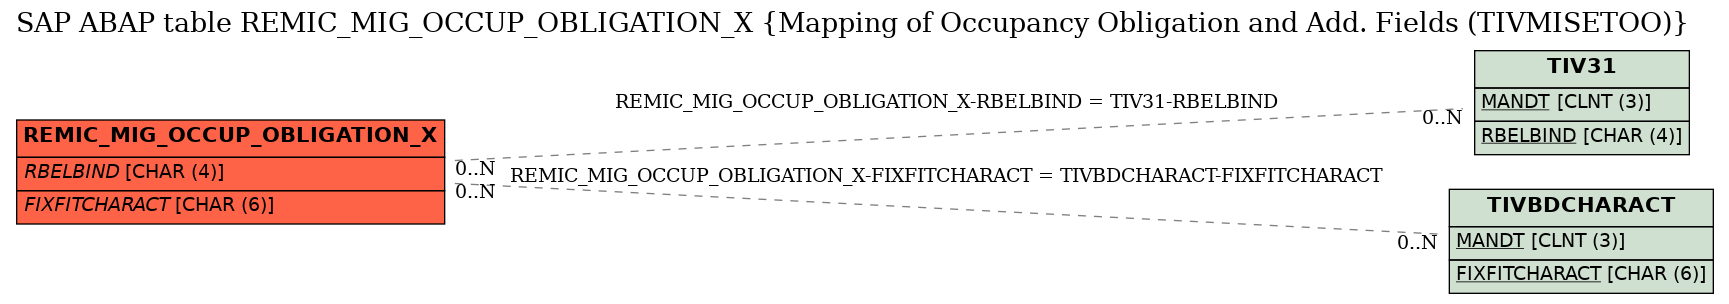 E-R Diagram for table REMIC_MIG_OCCUP_OBLIGATION_X (Mapping of Occupancy Obligation and Add. Fields (TIVMISETOO))